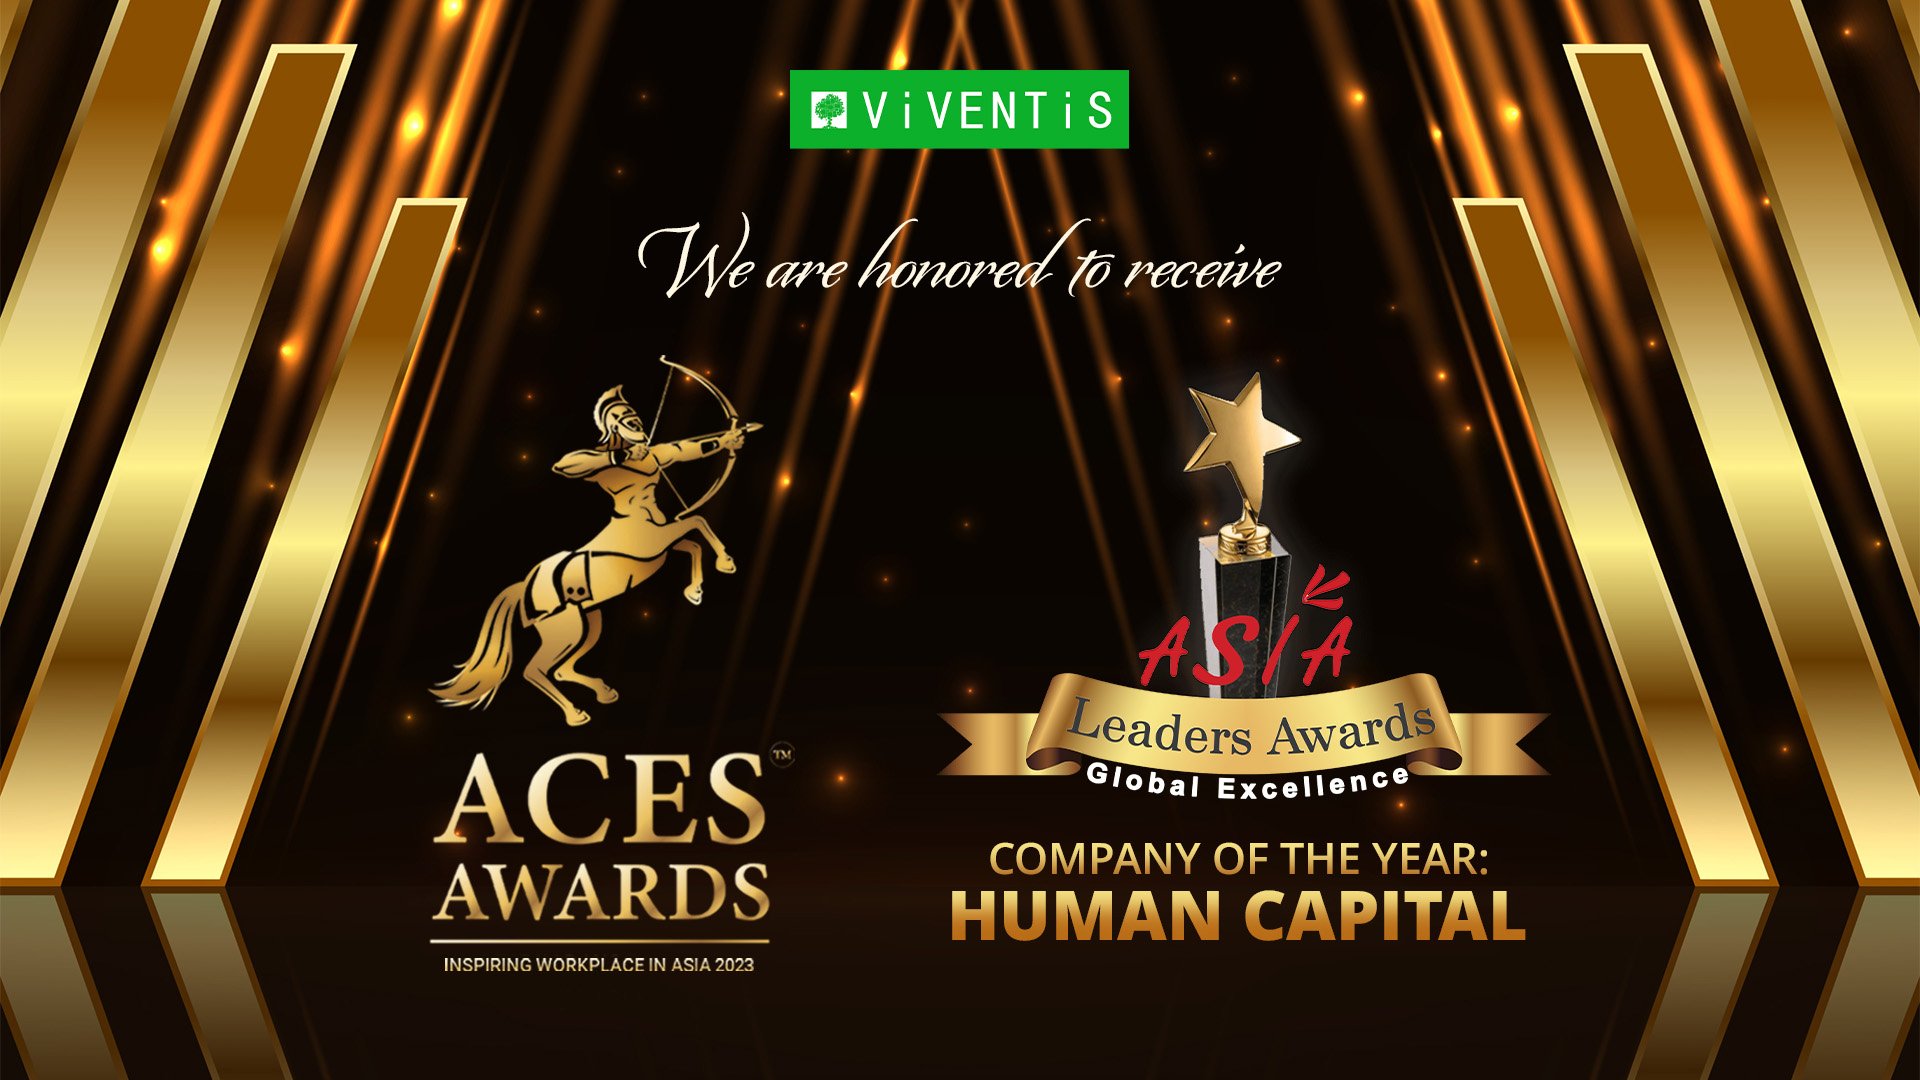 Viventis' People-Centric Approach and Superior Human Capital Strategy Garner Consecutive Accolades